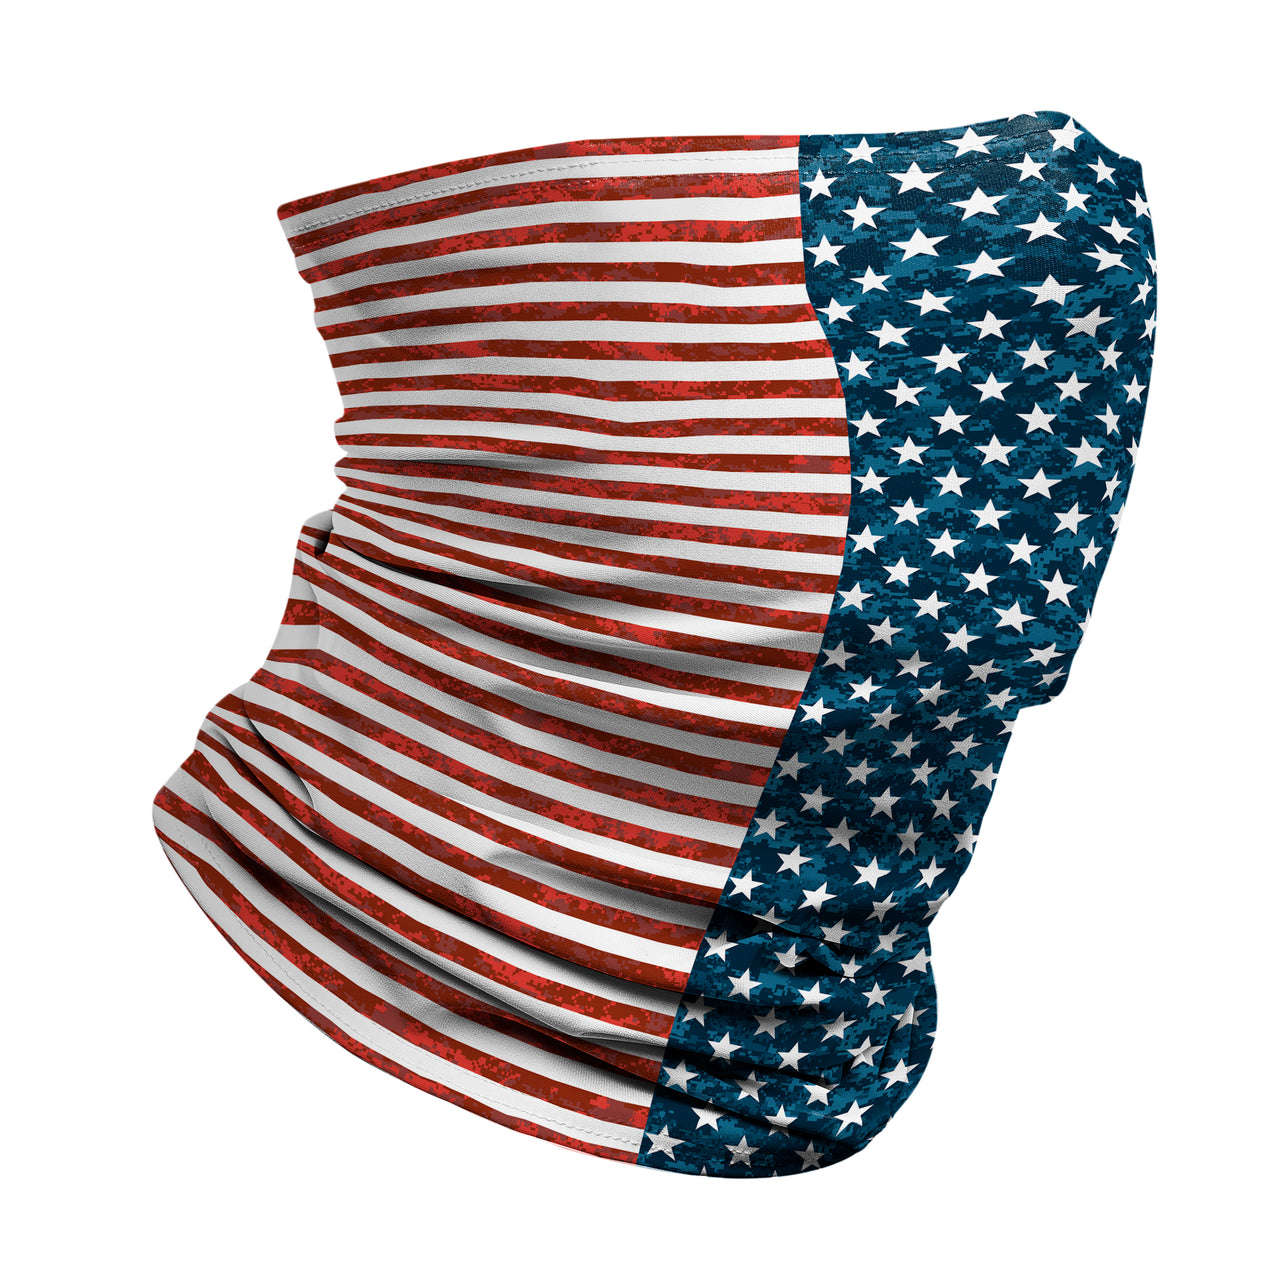 right side view of distressed american flag red white and blue printed JUNK winter neck gaiter